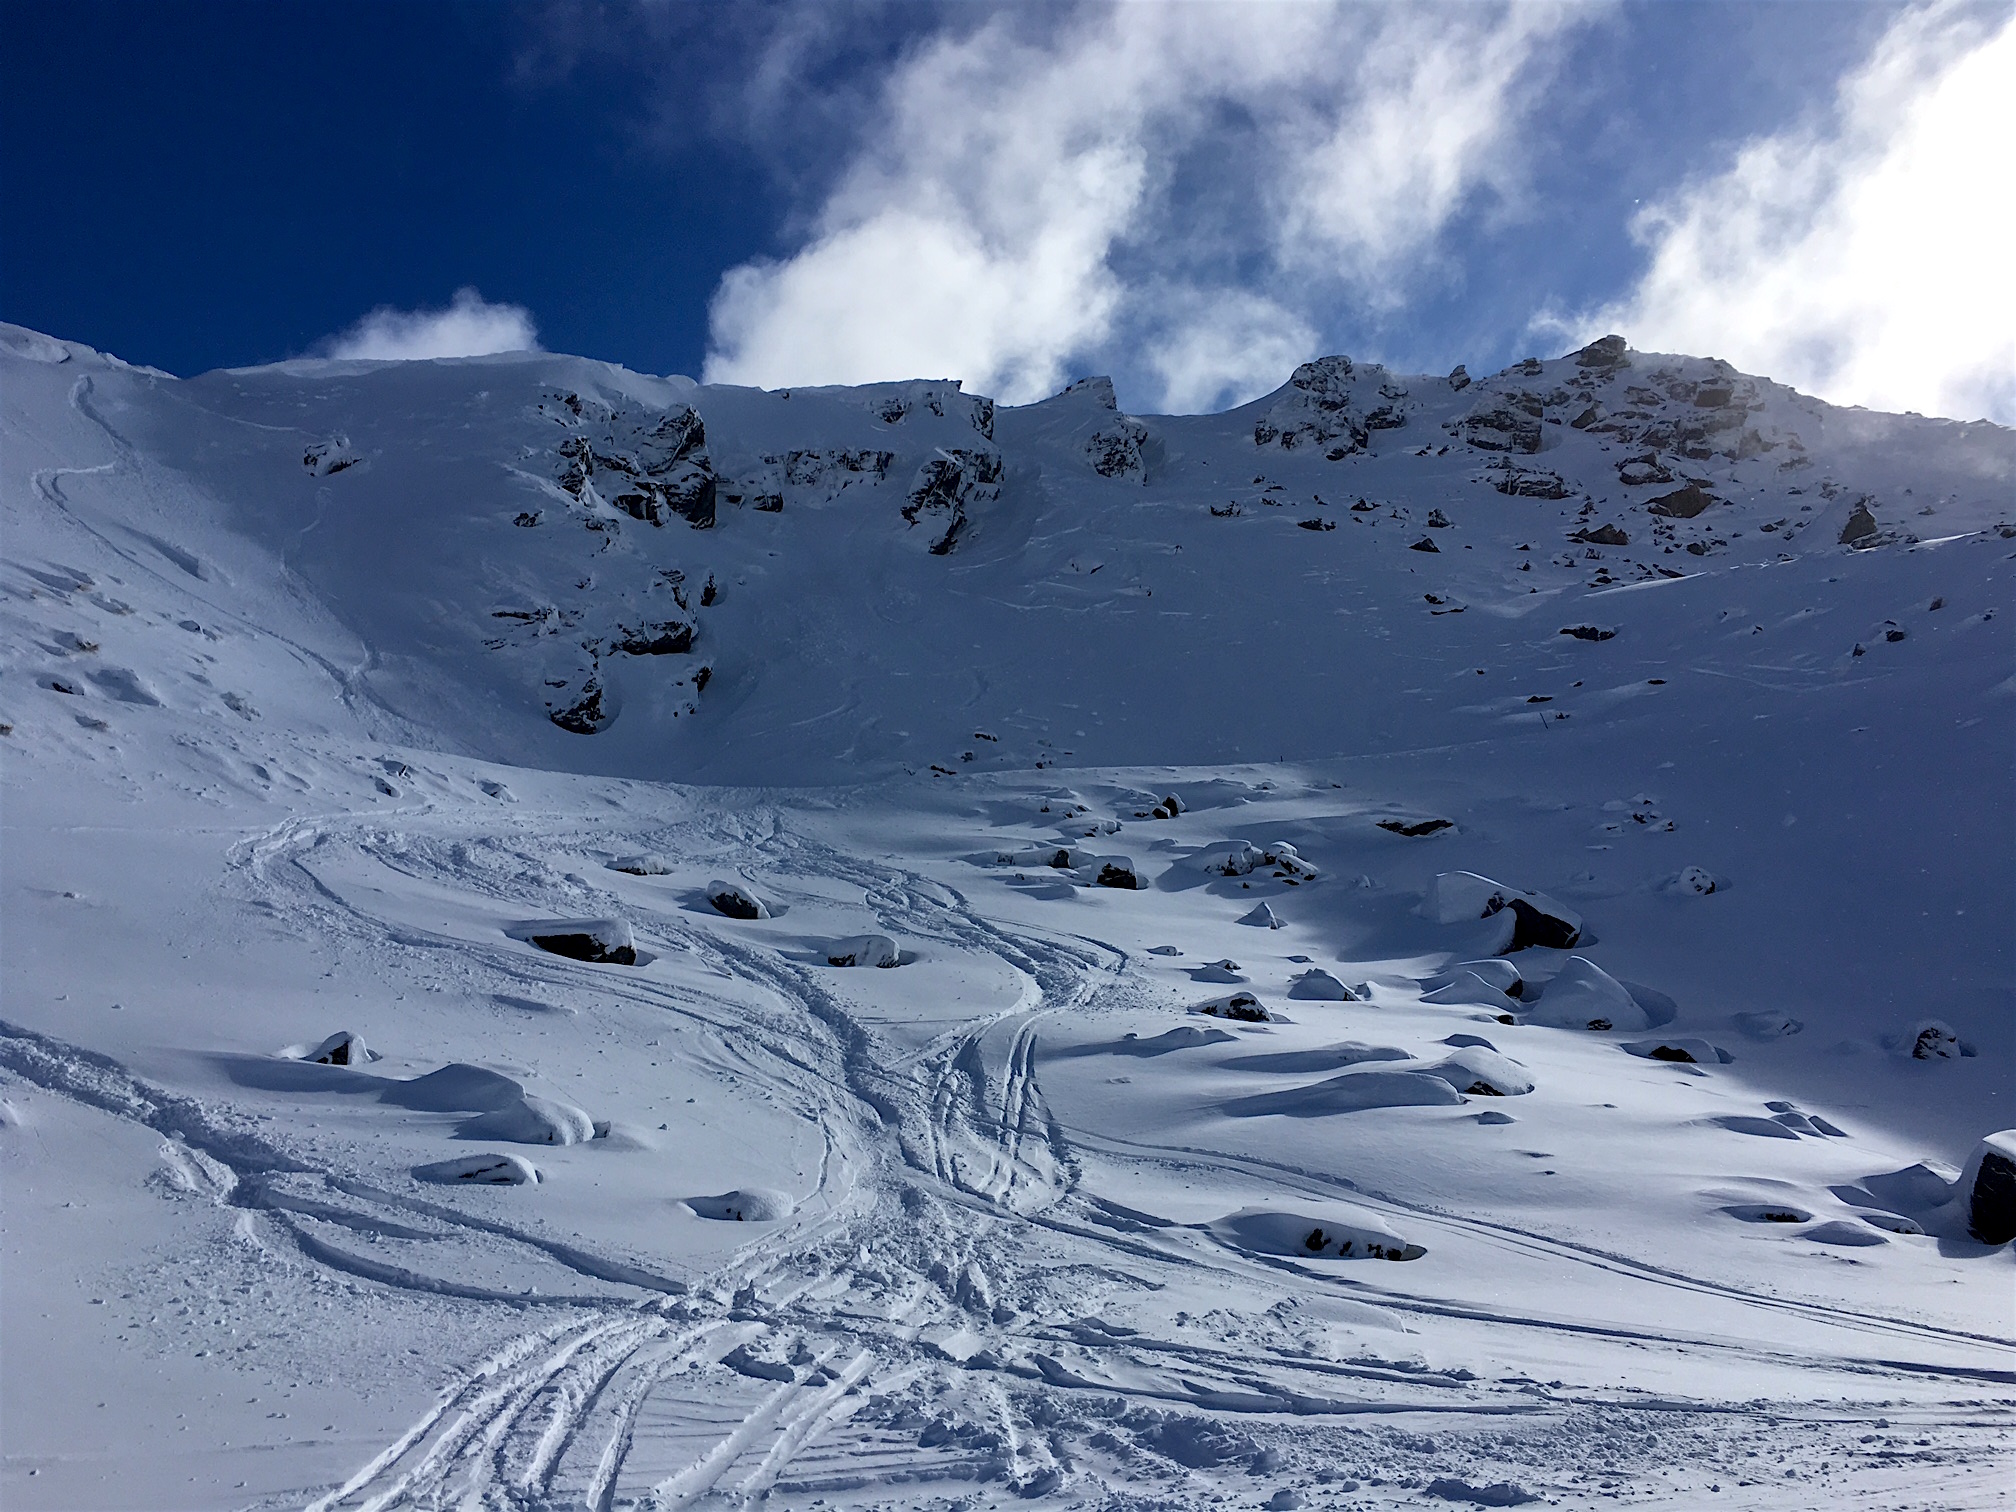 Cardrona on July 14th, 2016. photo: guy ladouche/snowbrains